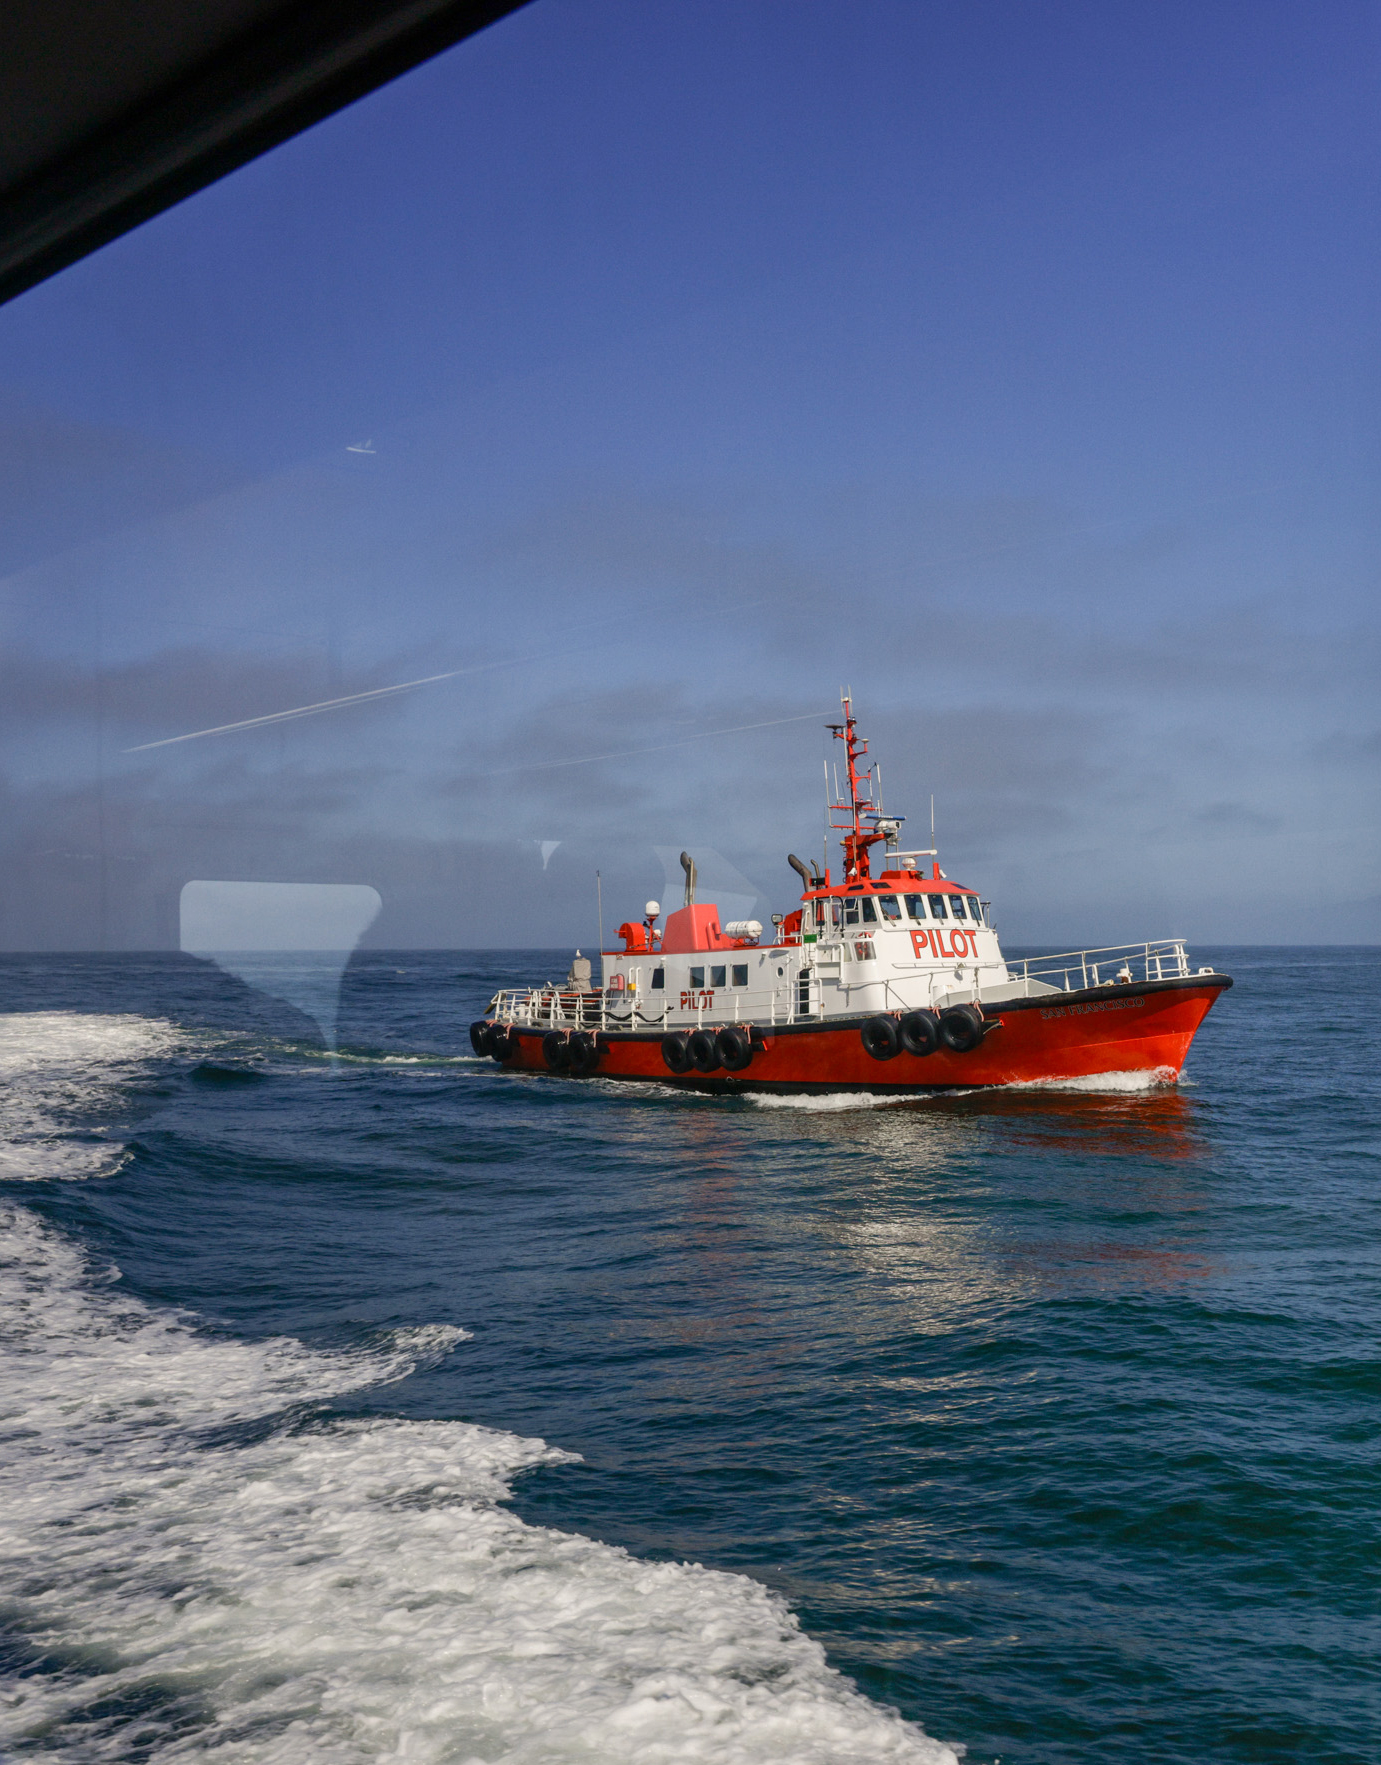 A pilot boat at sea, viewed from a window, leaving a wake under a blue sky.